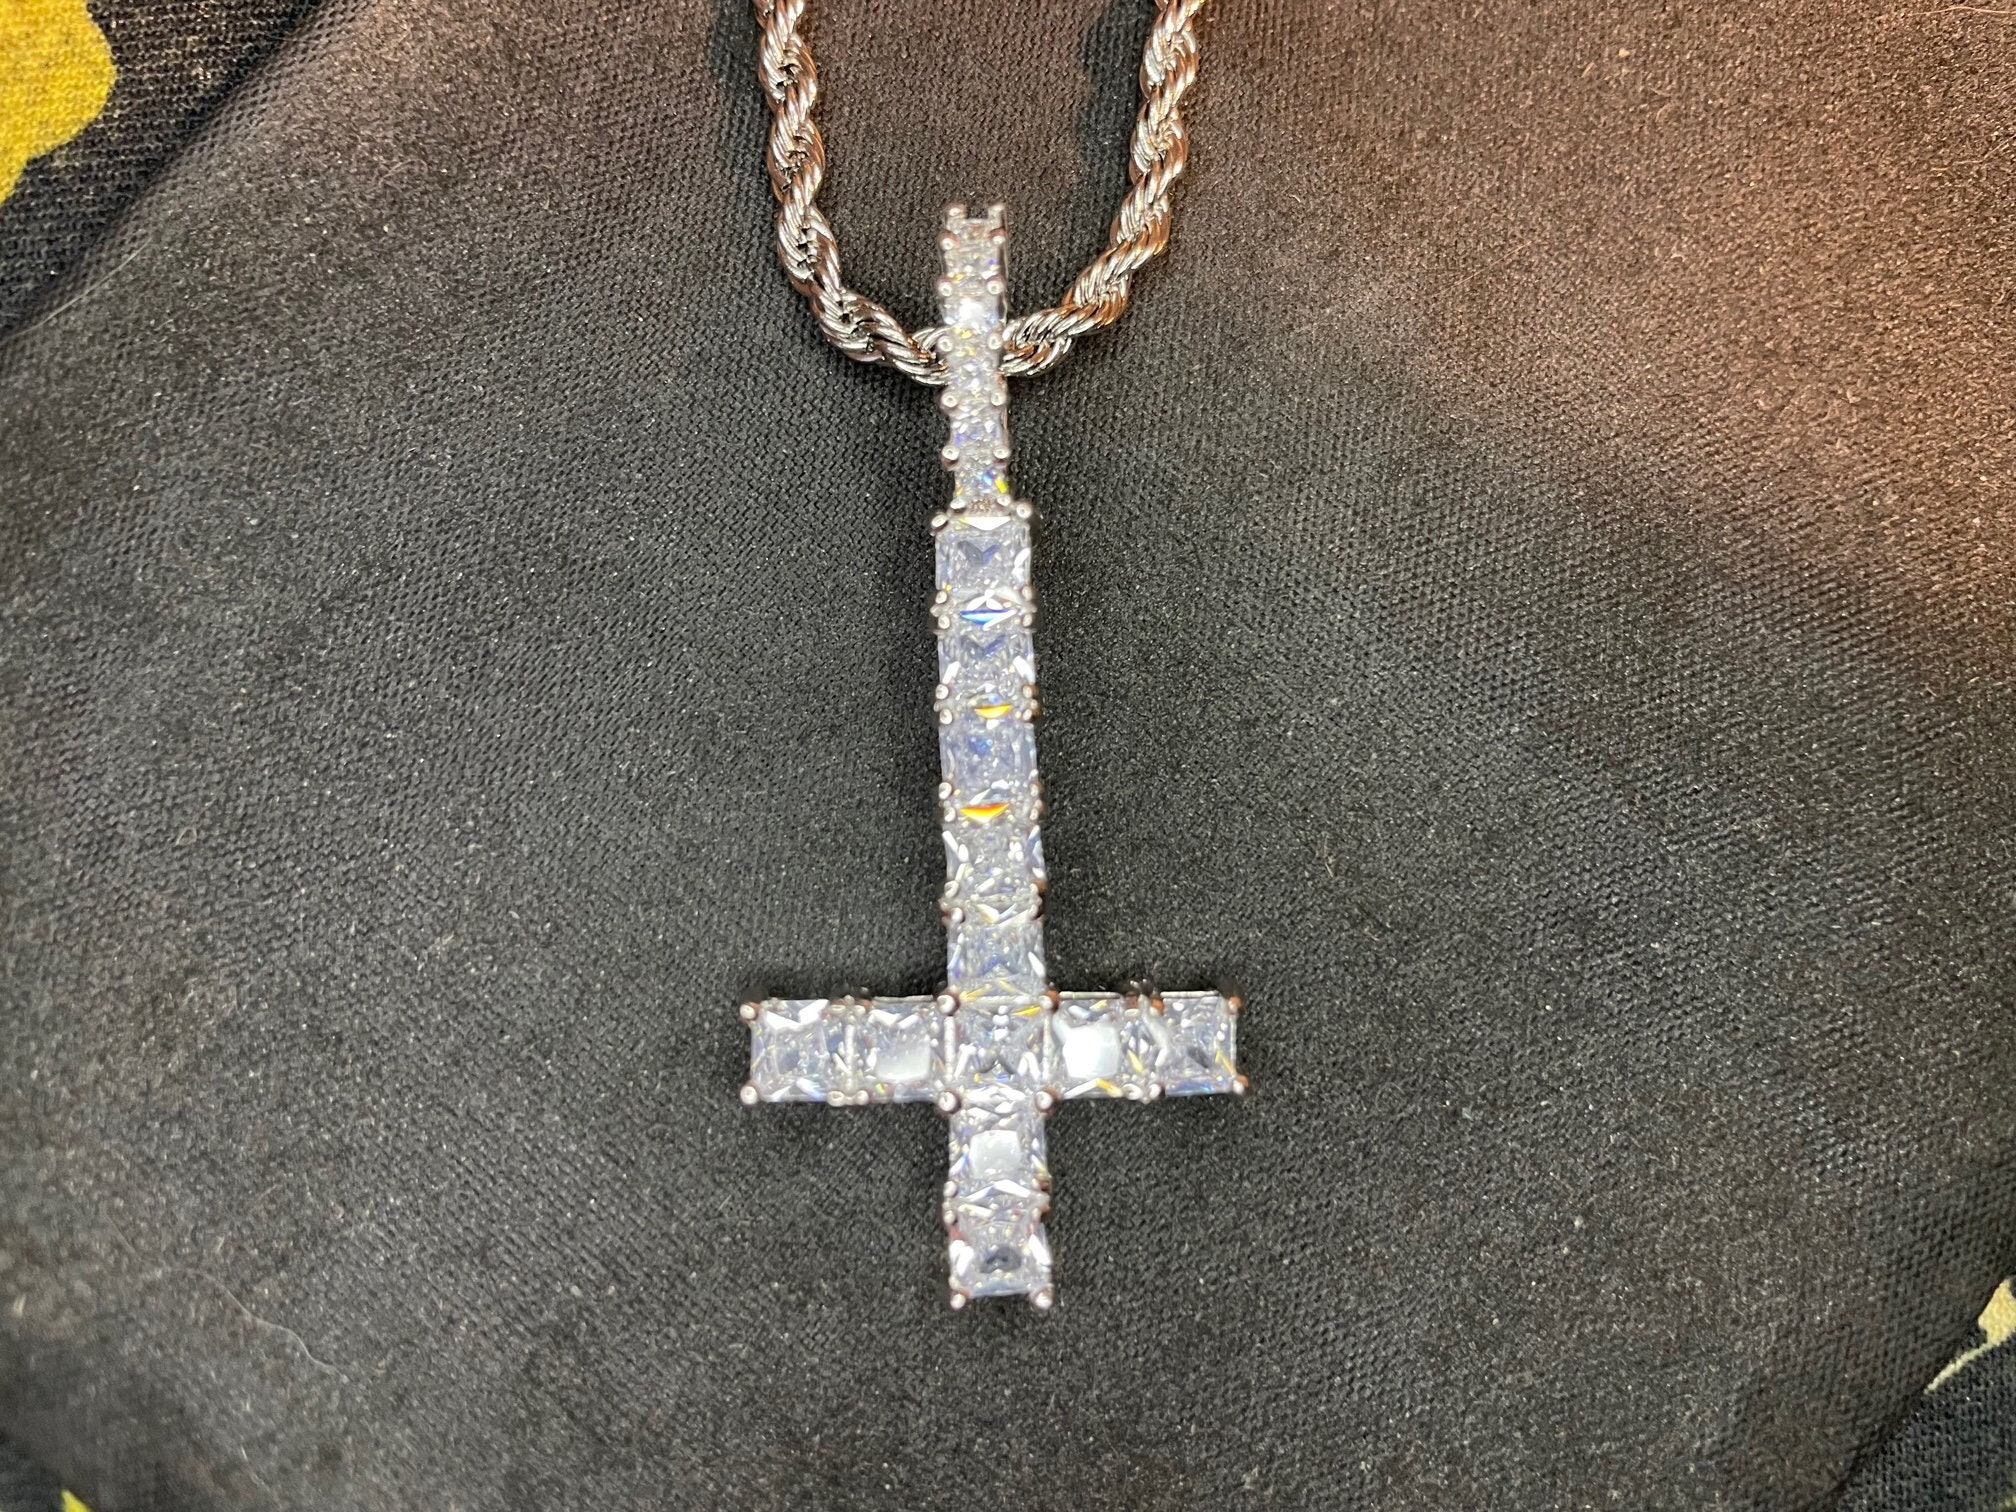 Upside Down Cross Necklace - Etsy